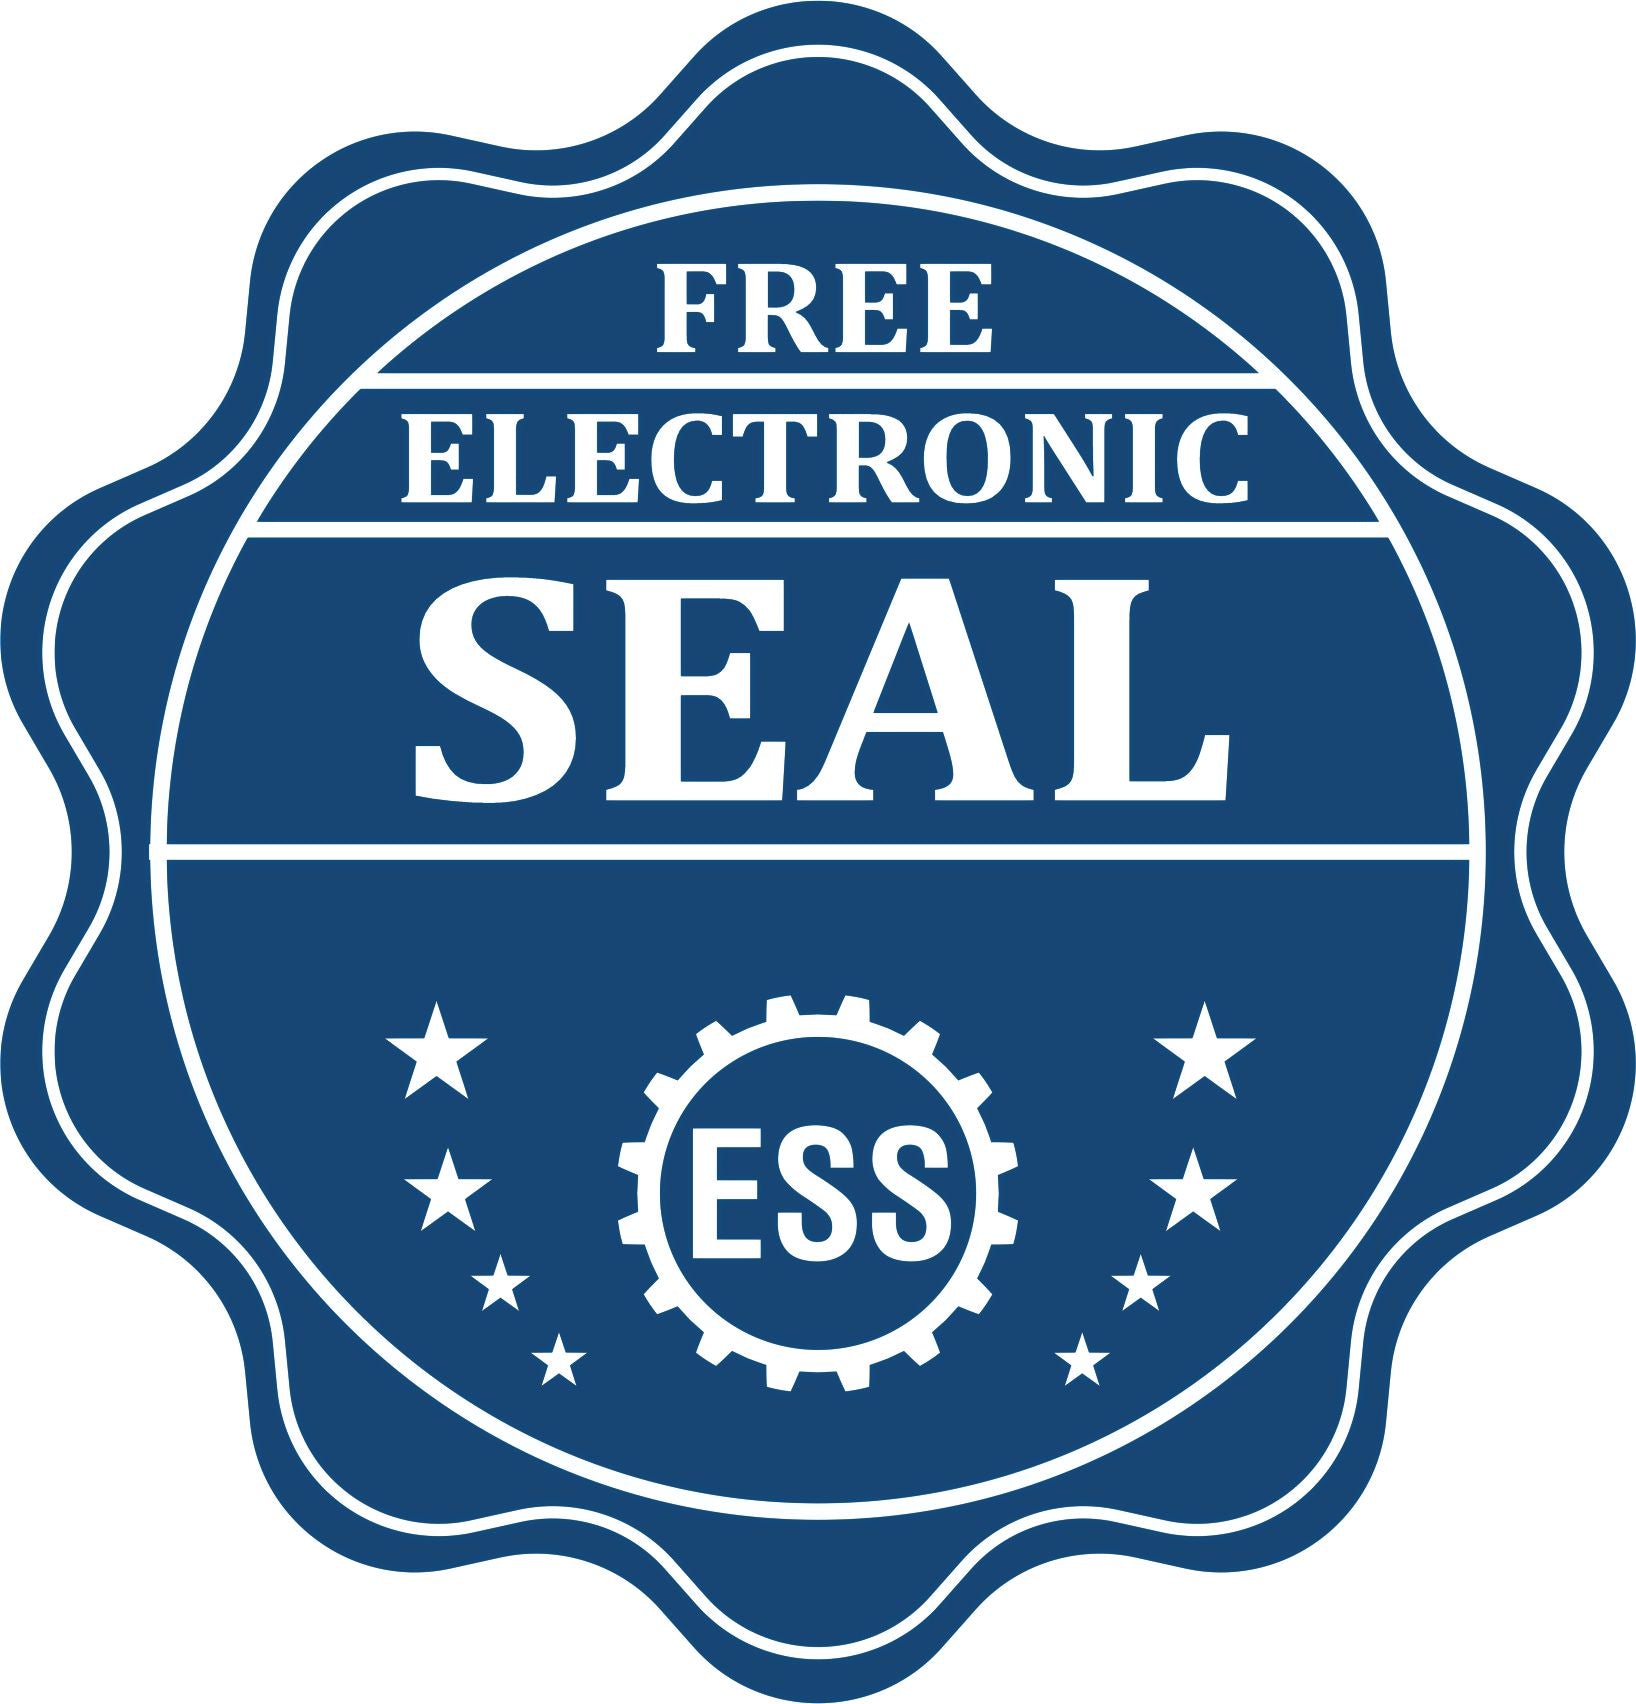 A badge showing a free electronic seal for the Handheld Virginia Land Surveyor Seal with stars and the ESS gear on the emblem.